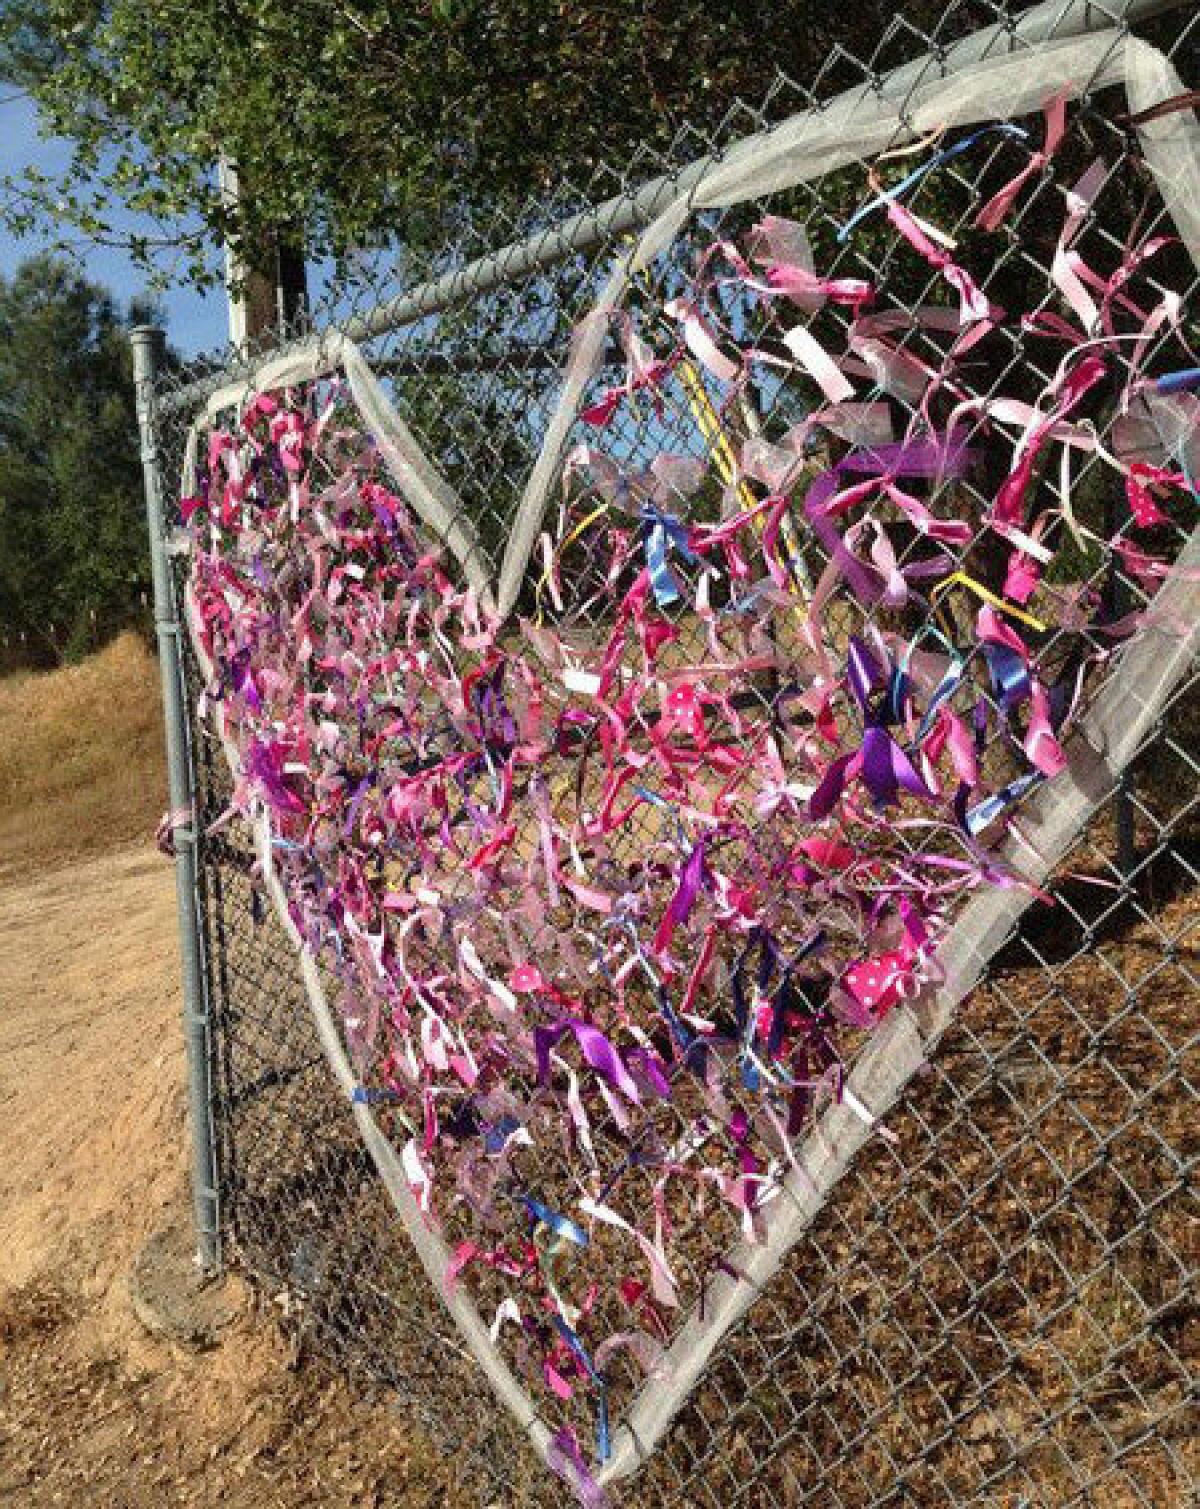 A heart of ribbons for slaying victim Leila Fowler adorns a chain-link fence at Jenny Lind Elementary School in Valley Springs, Calif. Leila's 12-year-old brother has been accused of her stabbing death.